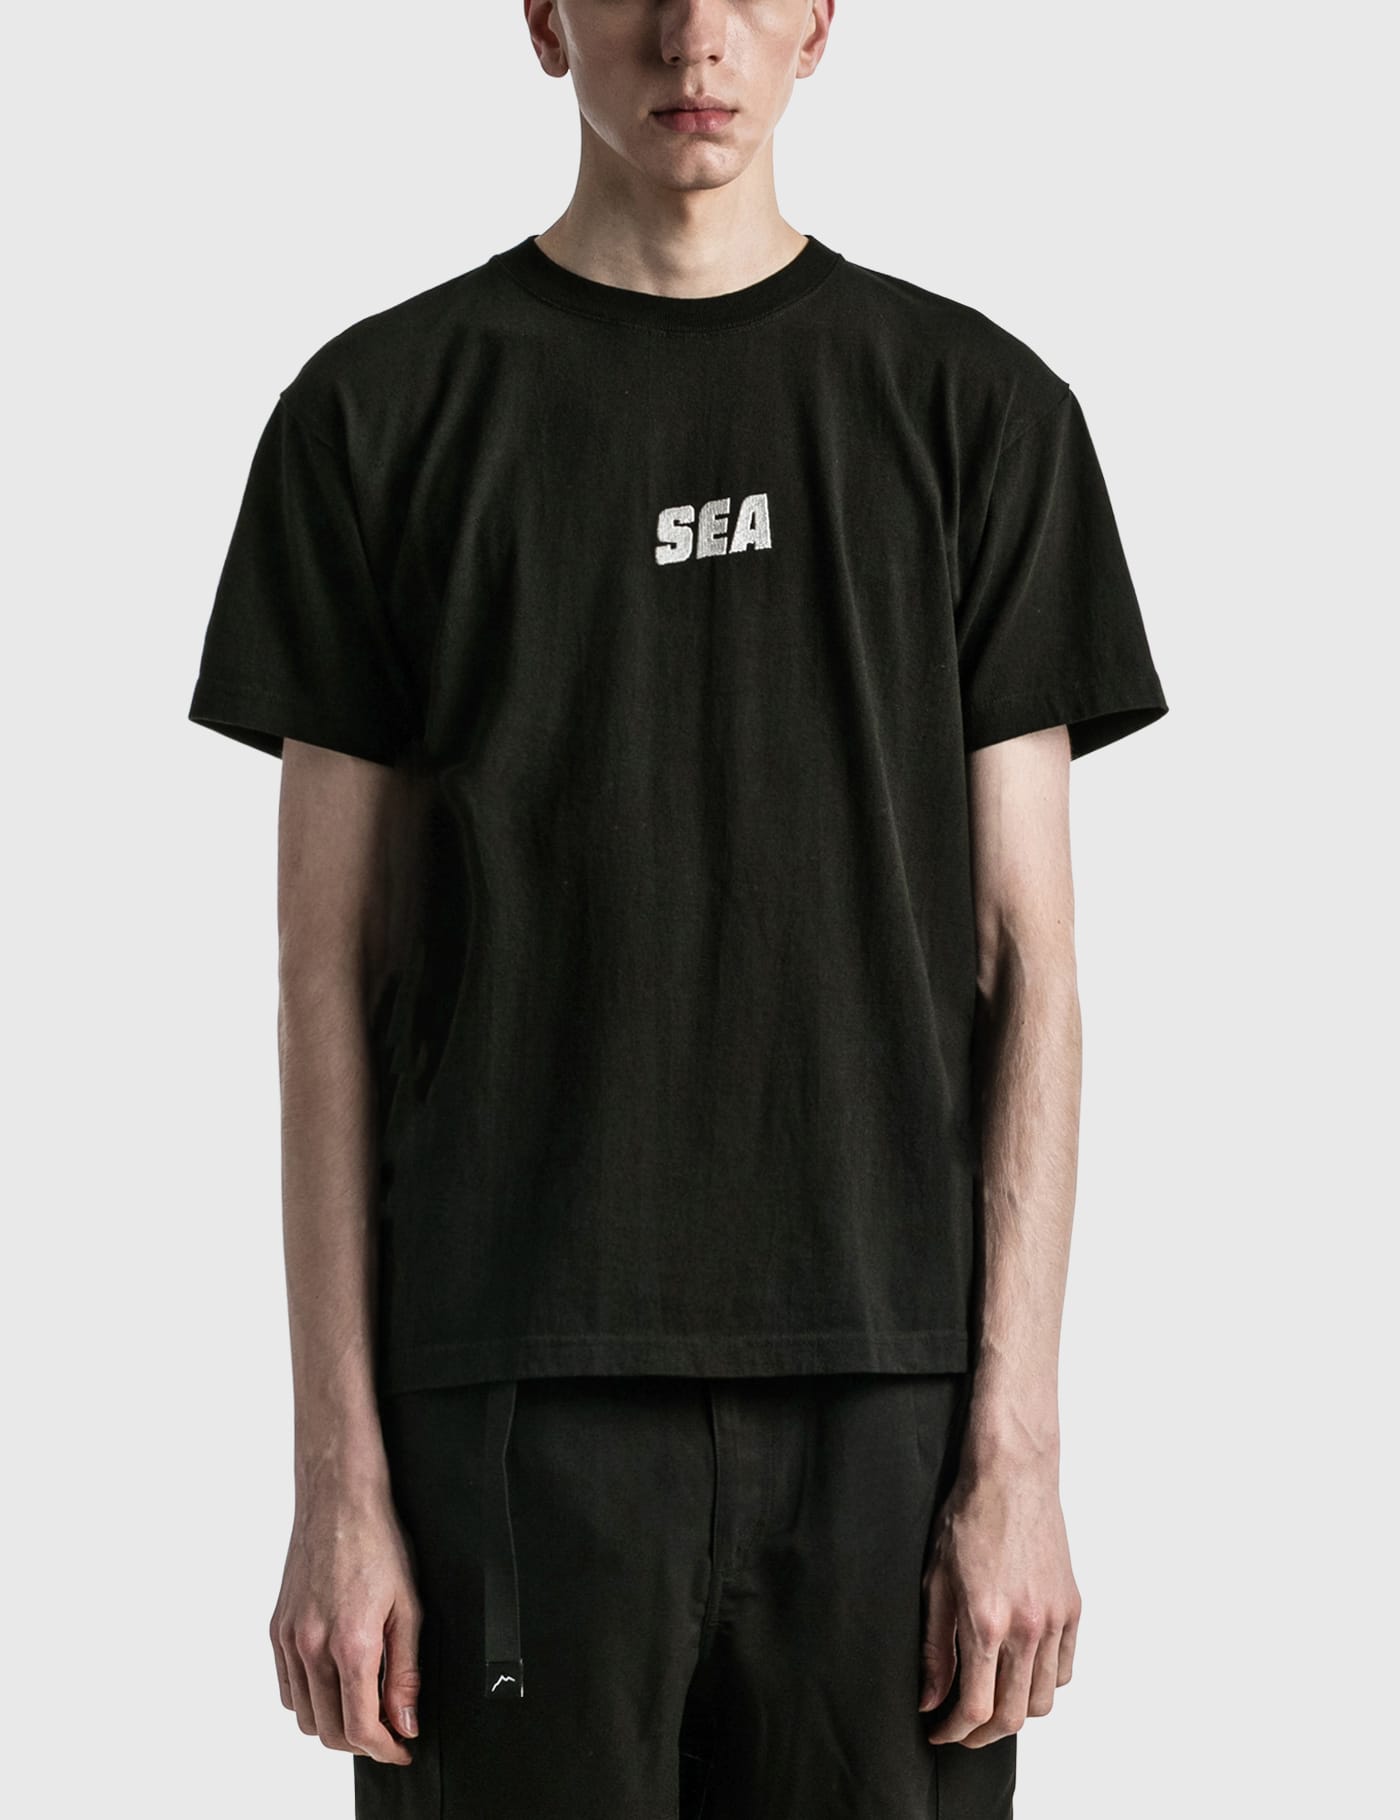 Wind And Sea - Sea Alive T-shirt | HBX - HYPEBEAST 為您搜羅全球 